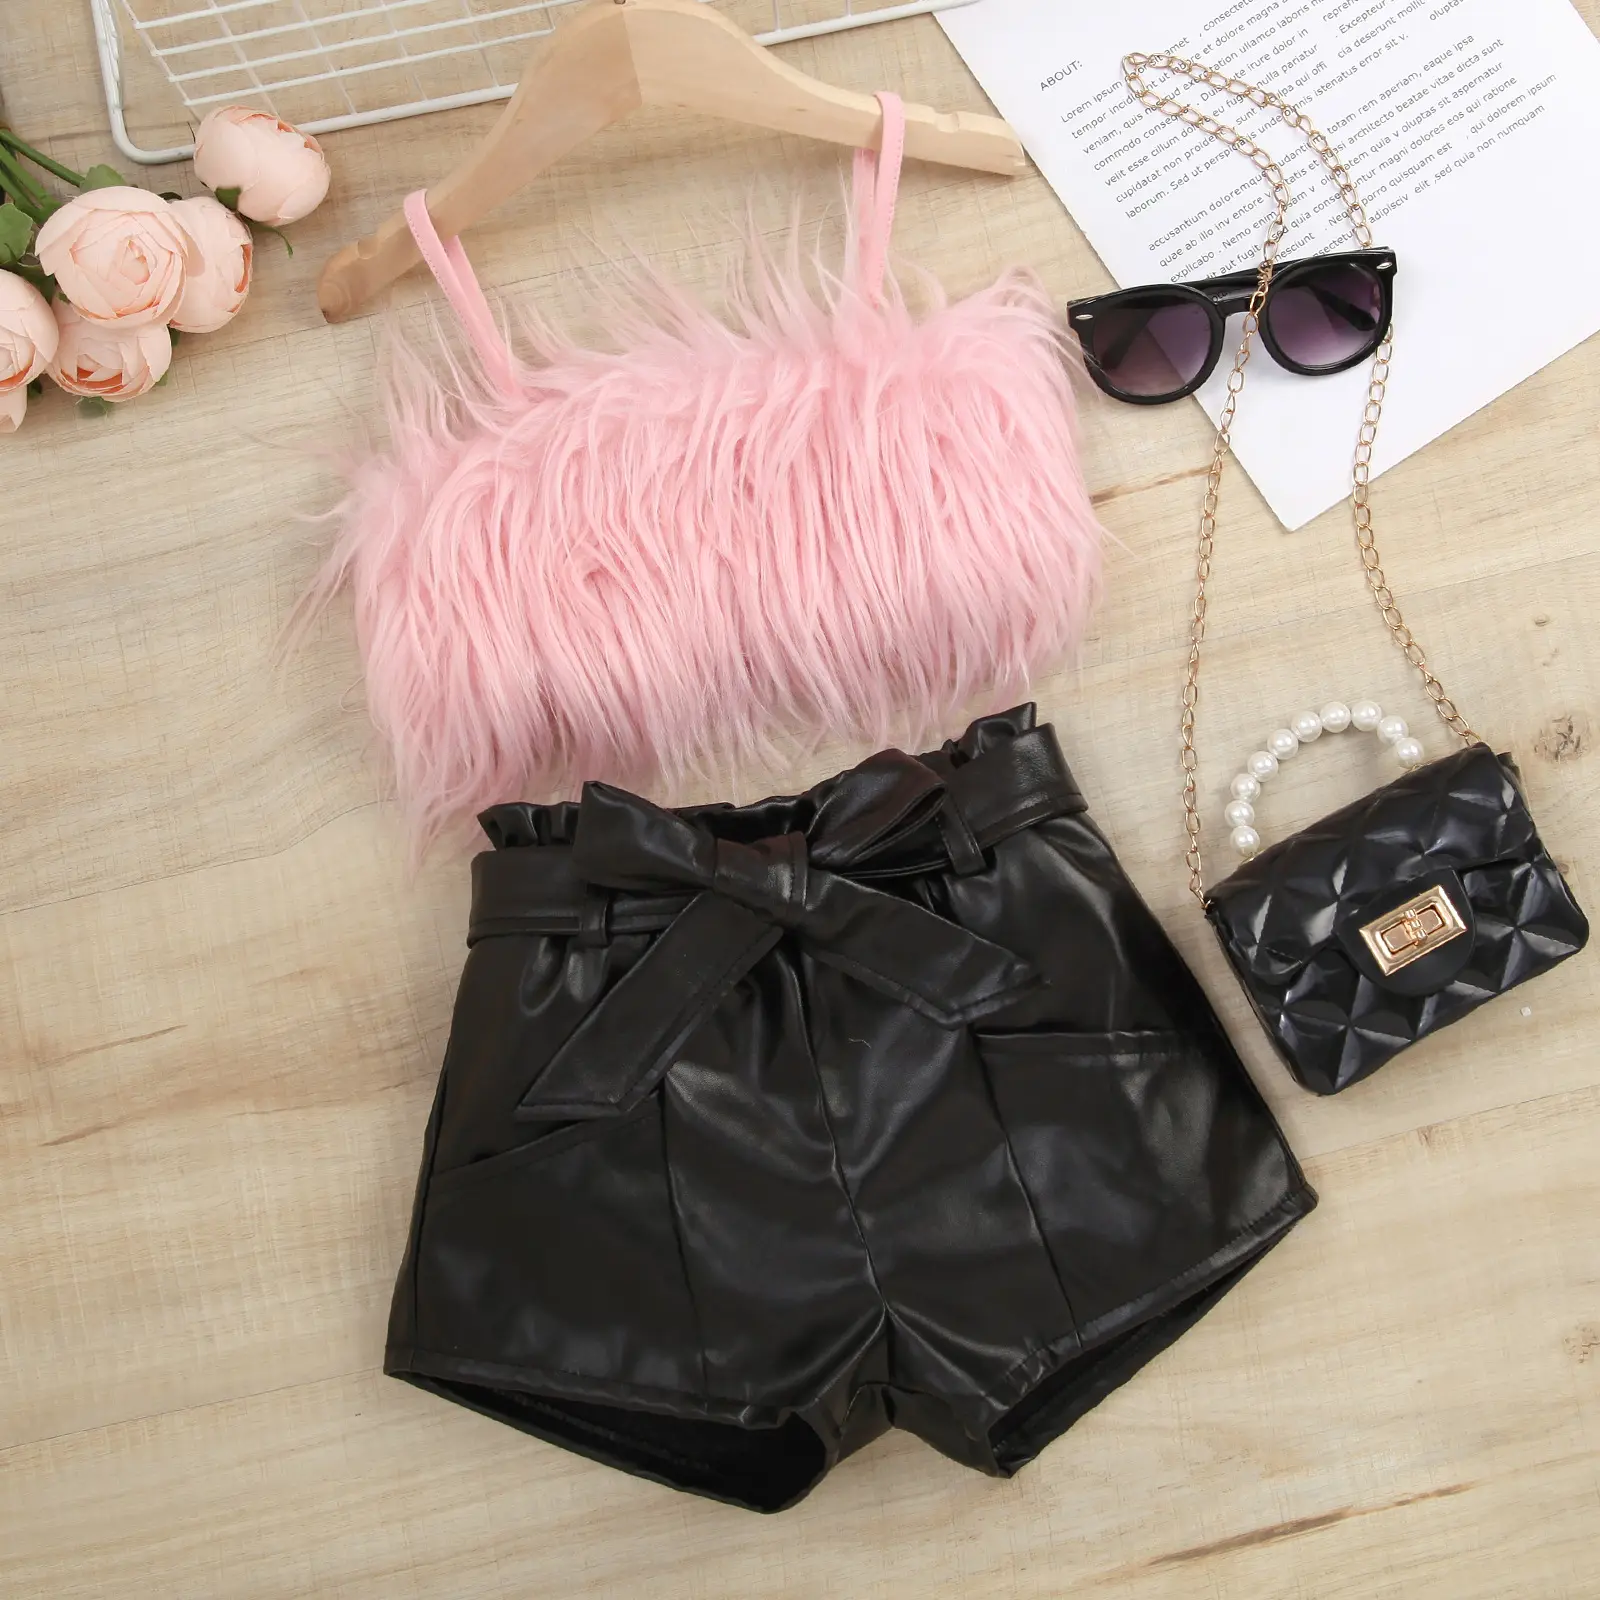 New Baby Girls Boutique Clothing 2 Pcs Sets Furry Suspender Top Leather Pants Kids Suit With Belt Children's Clothing